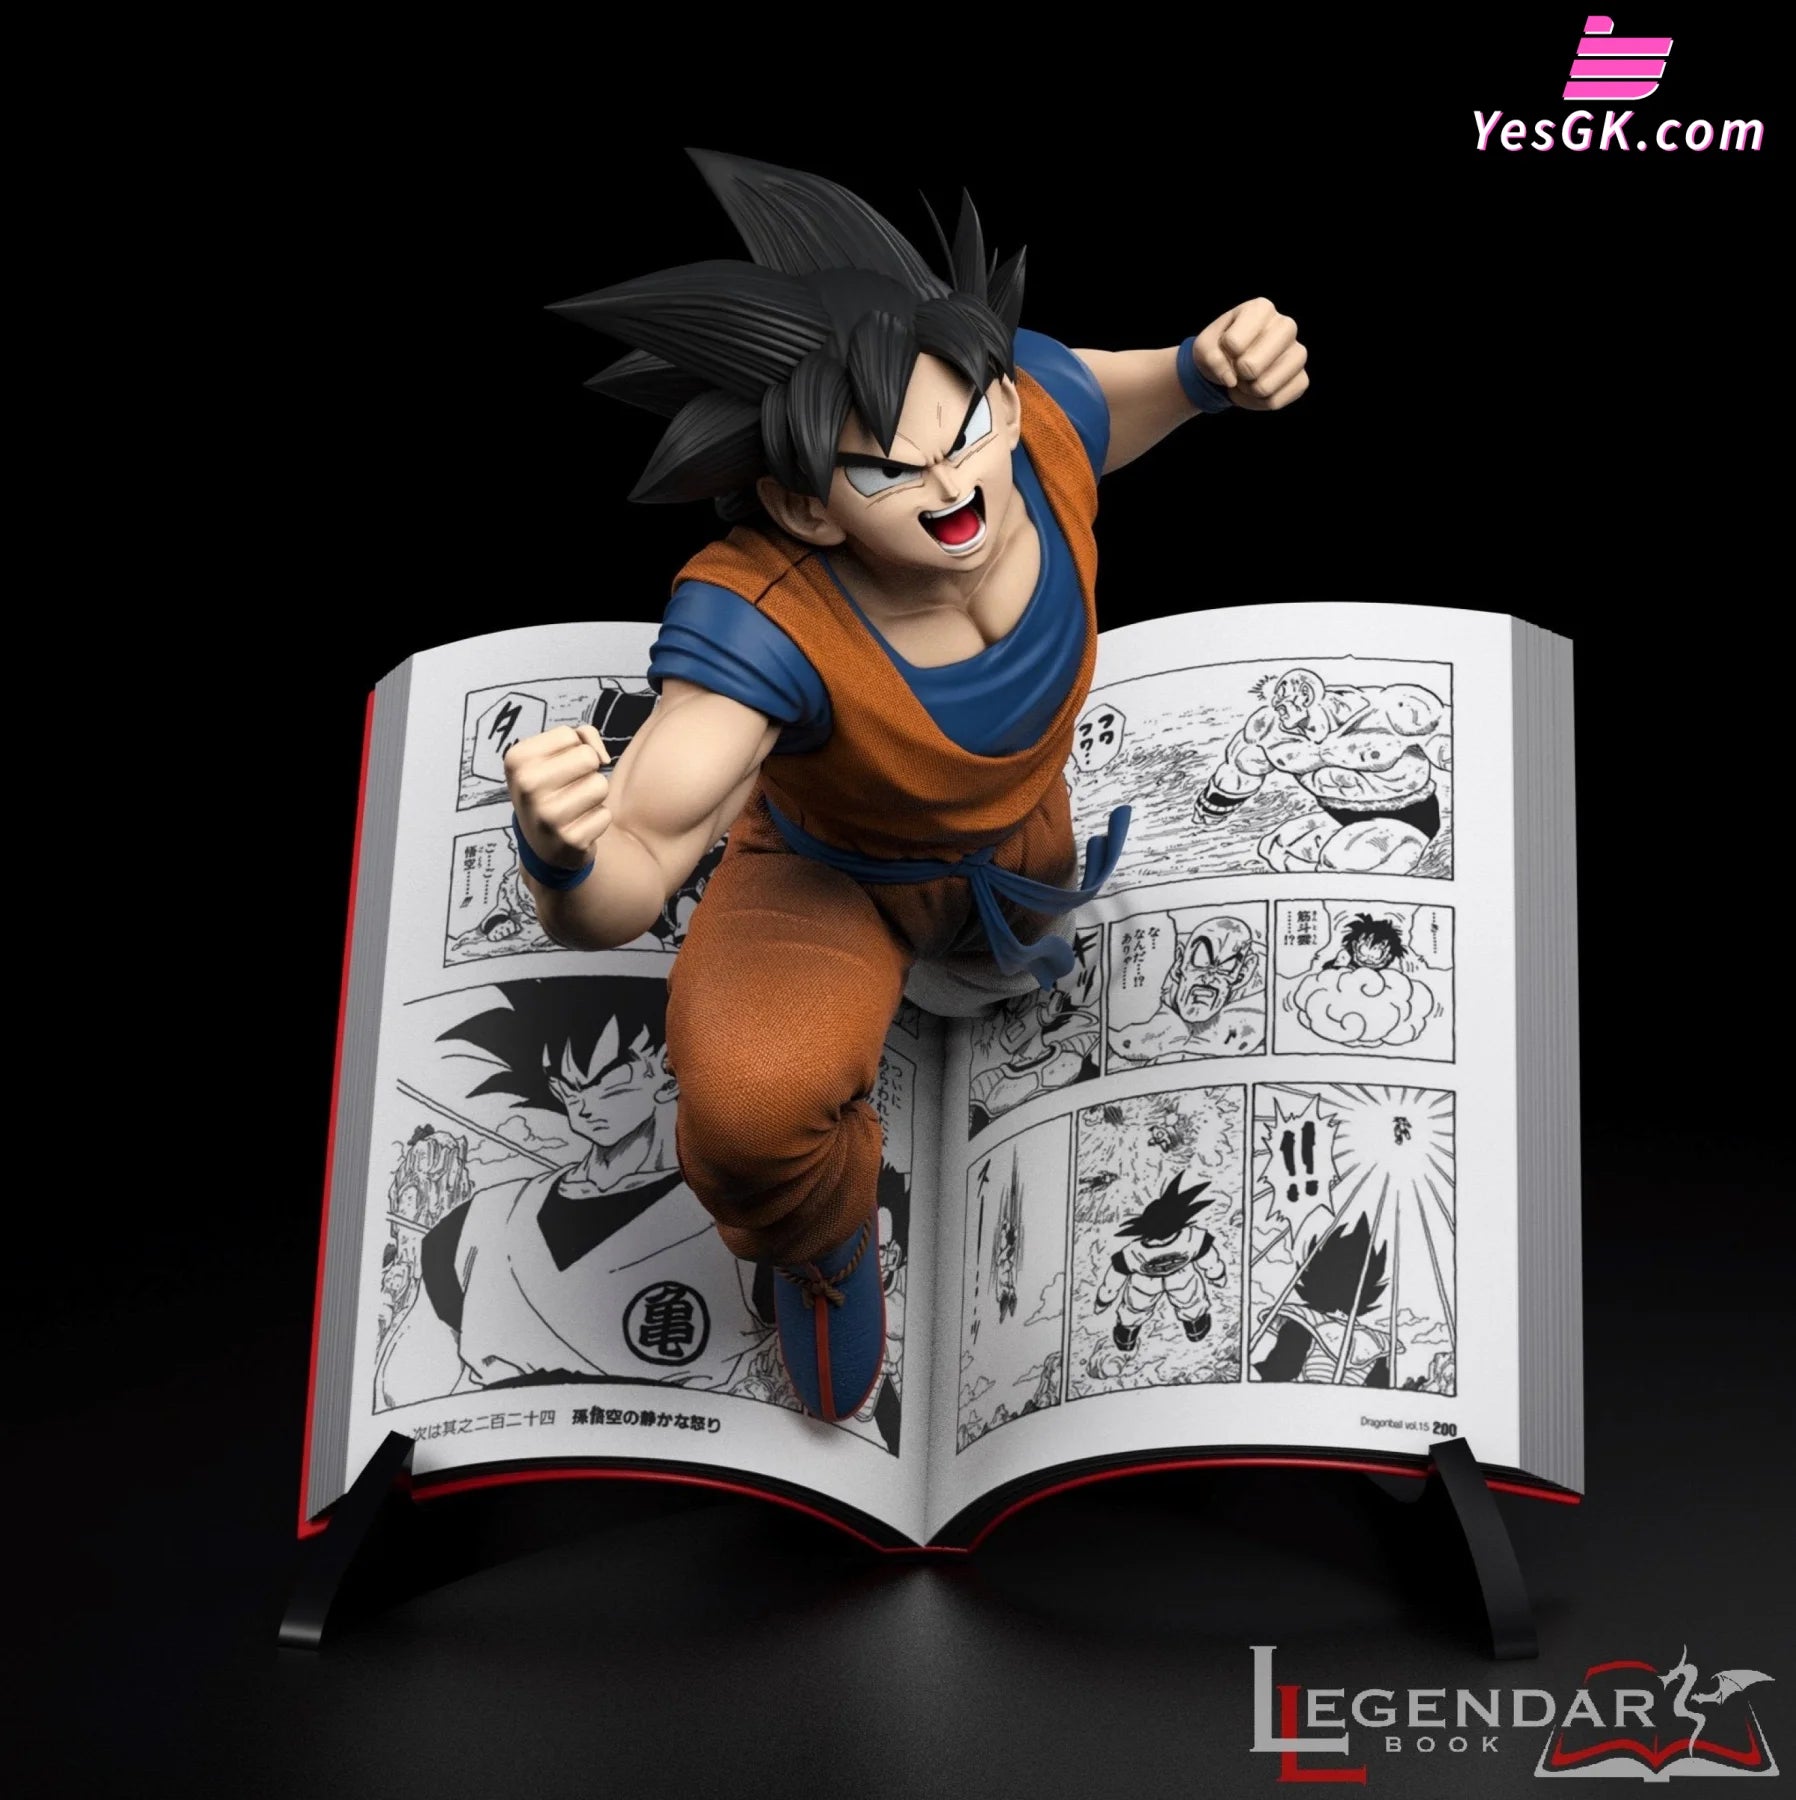 Dragon Ball Goku (Life Size Book) Statue - Legendary Book Studio [In-Stock] Full Payment / 1/6 Scale